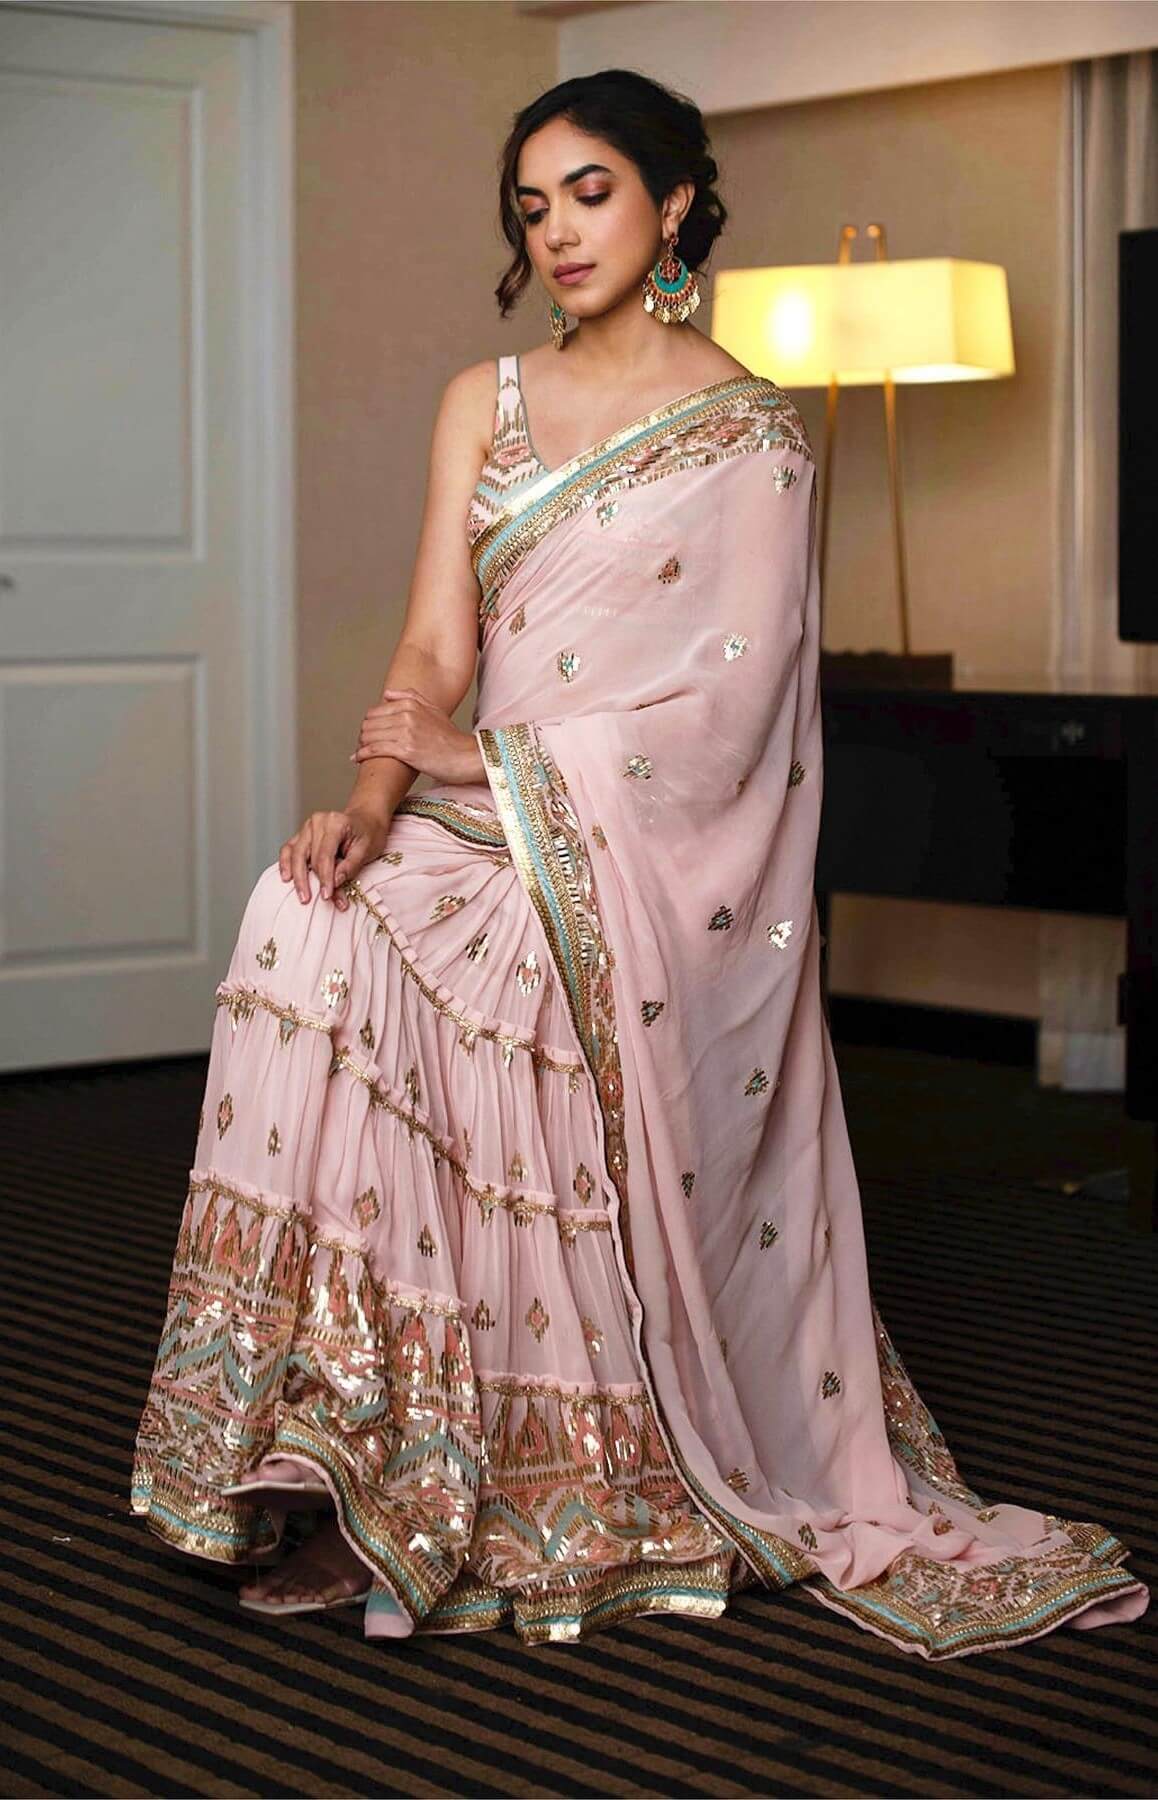 Ritu Varma Look Mesmerizingly Beautiful In Pastel Pink & Blue Golden Embroidered Saree With Sleeveless Blouse